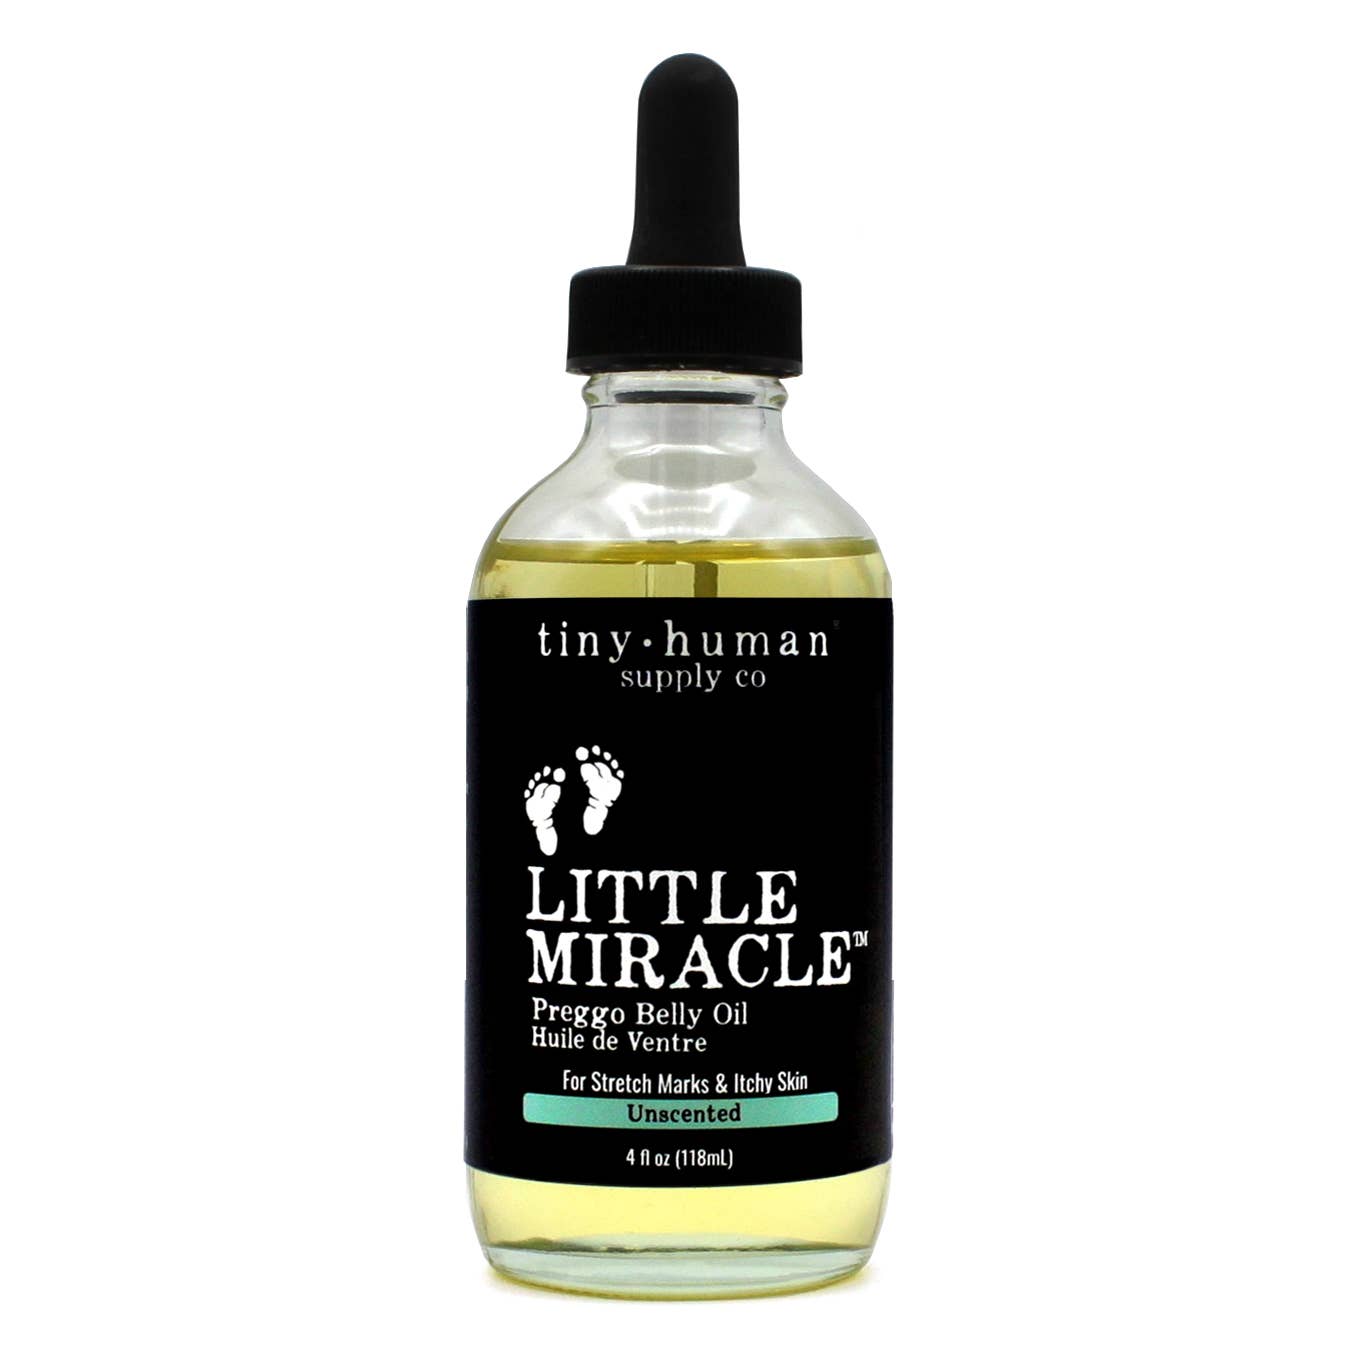 tiny human supply co. little miracle preggo belly oil unscented